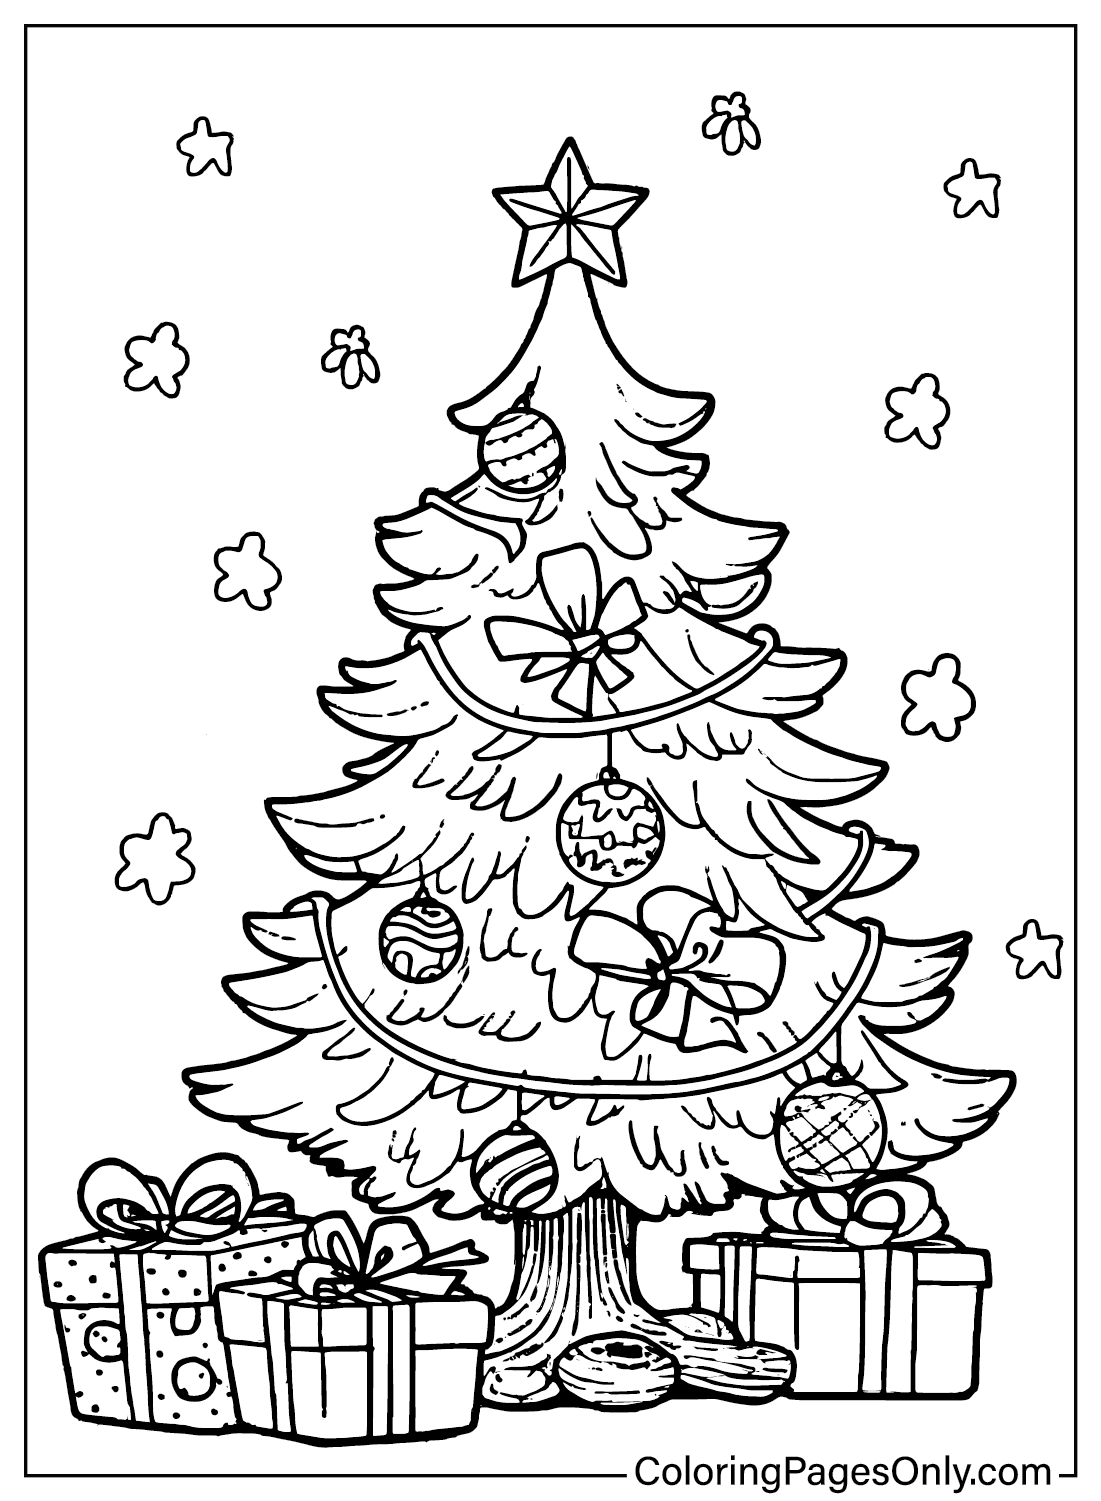 Christmas Tree Coloring Pages to Printable from Christmas Tree